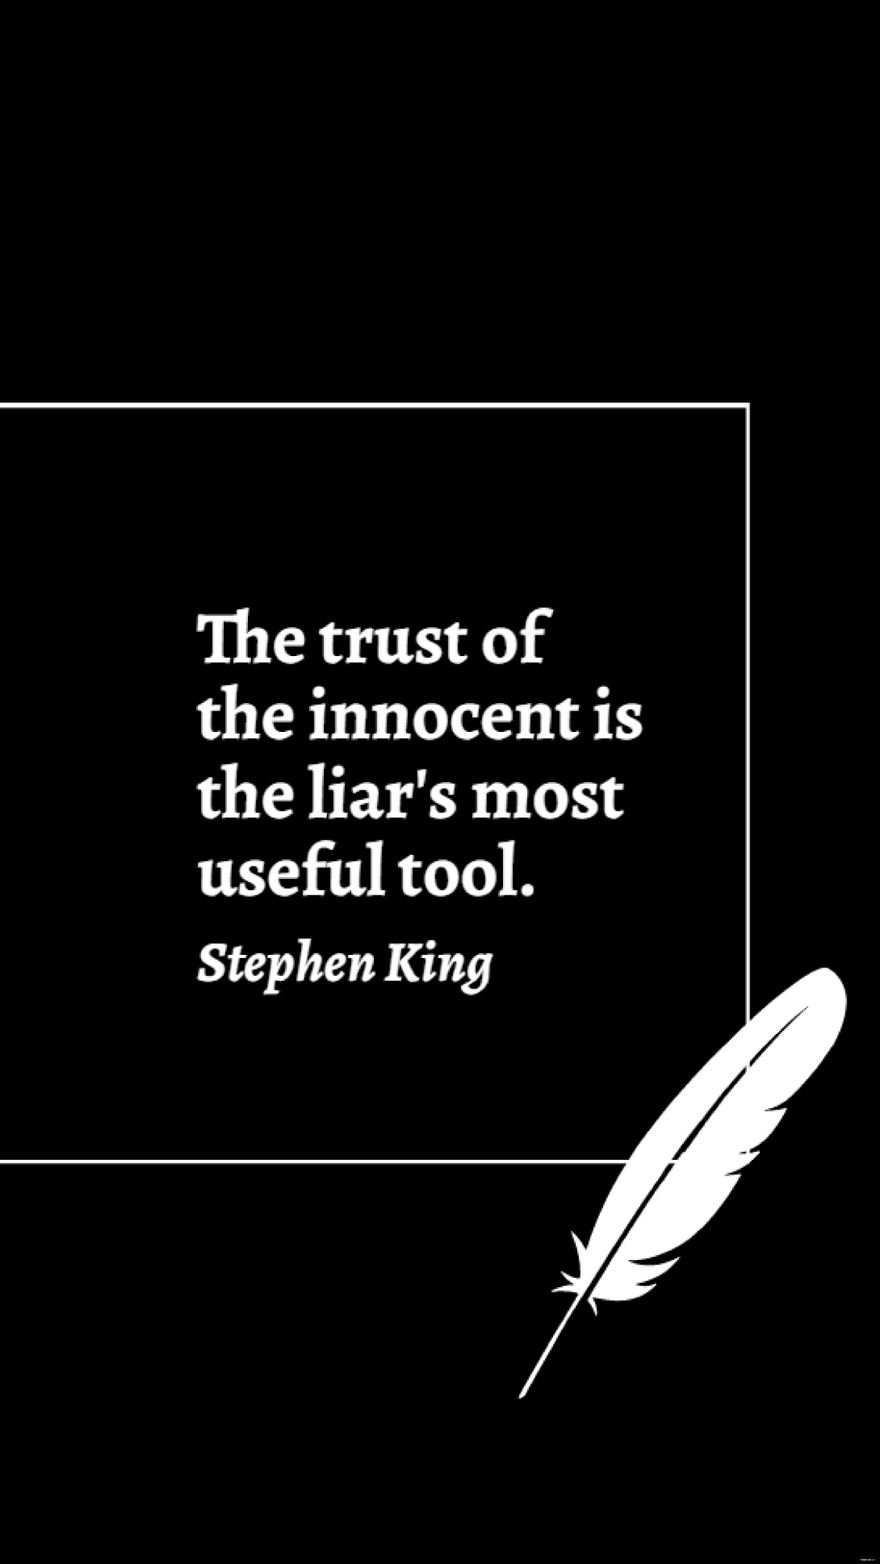 Stephen King - The trust of the innocent is the liar's most useful tool.